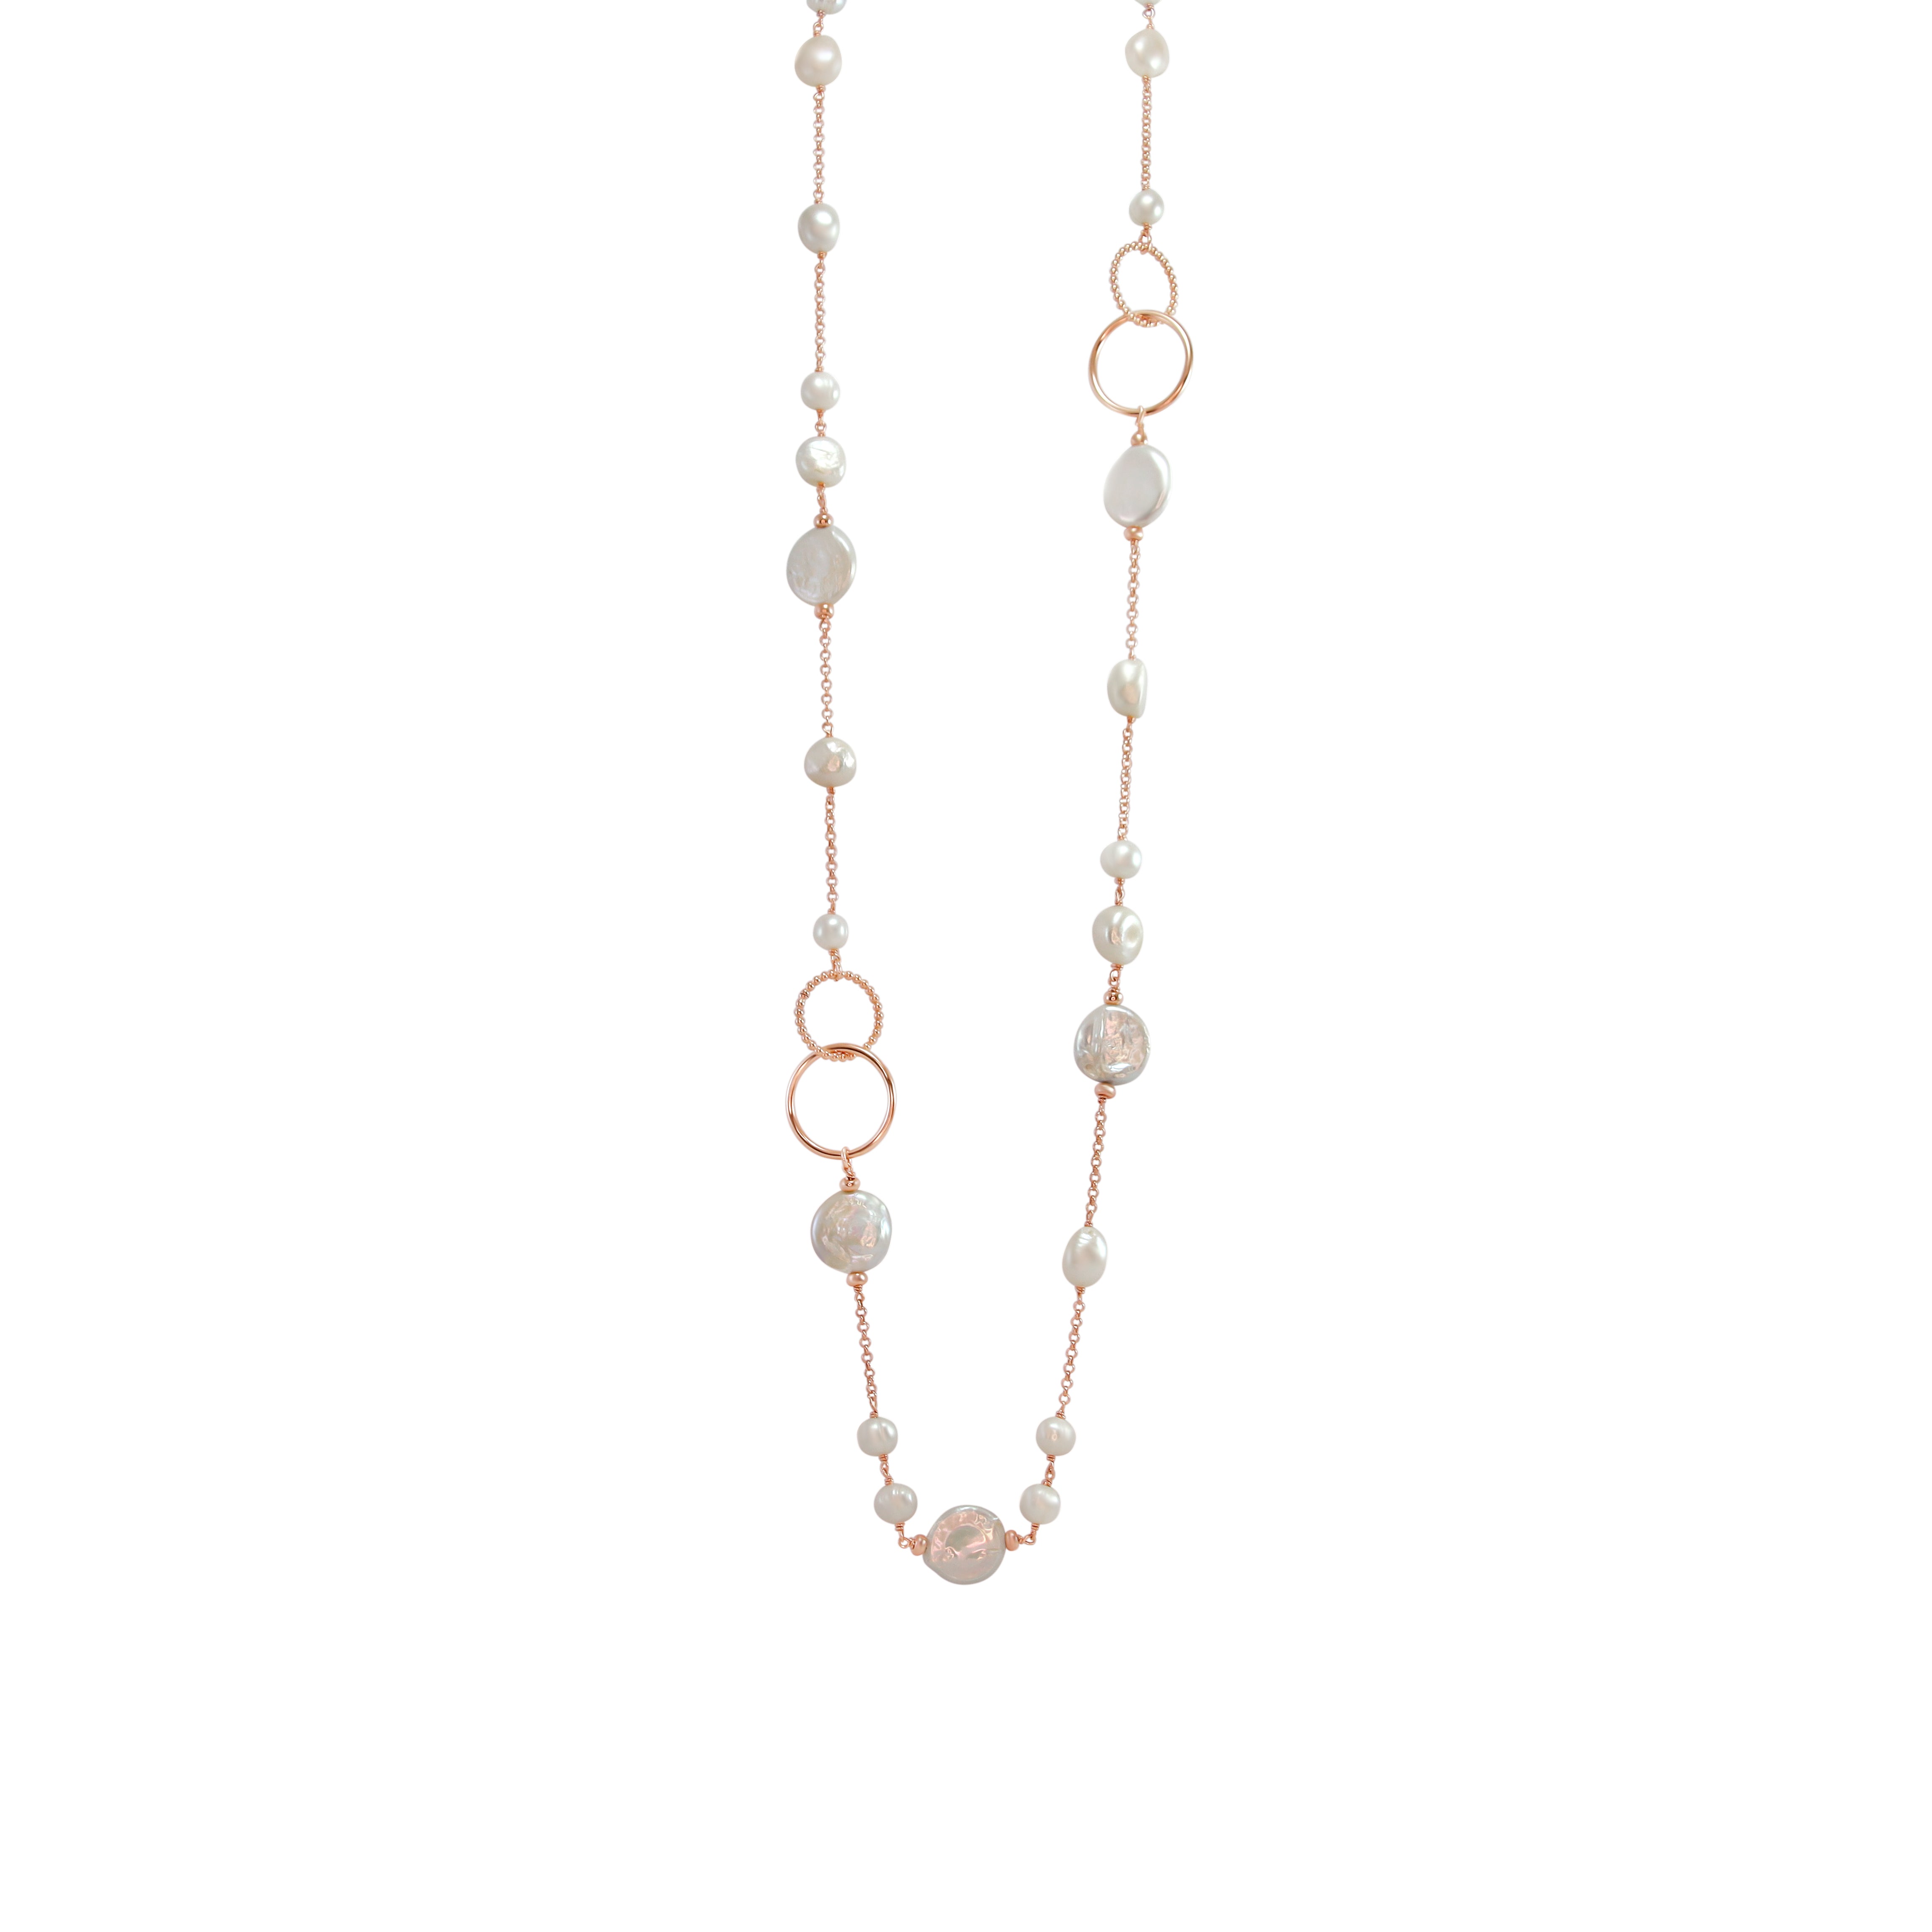 Pearl, Coin Pearl & Circle Link Necklace - 82cm